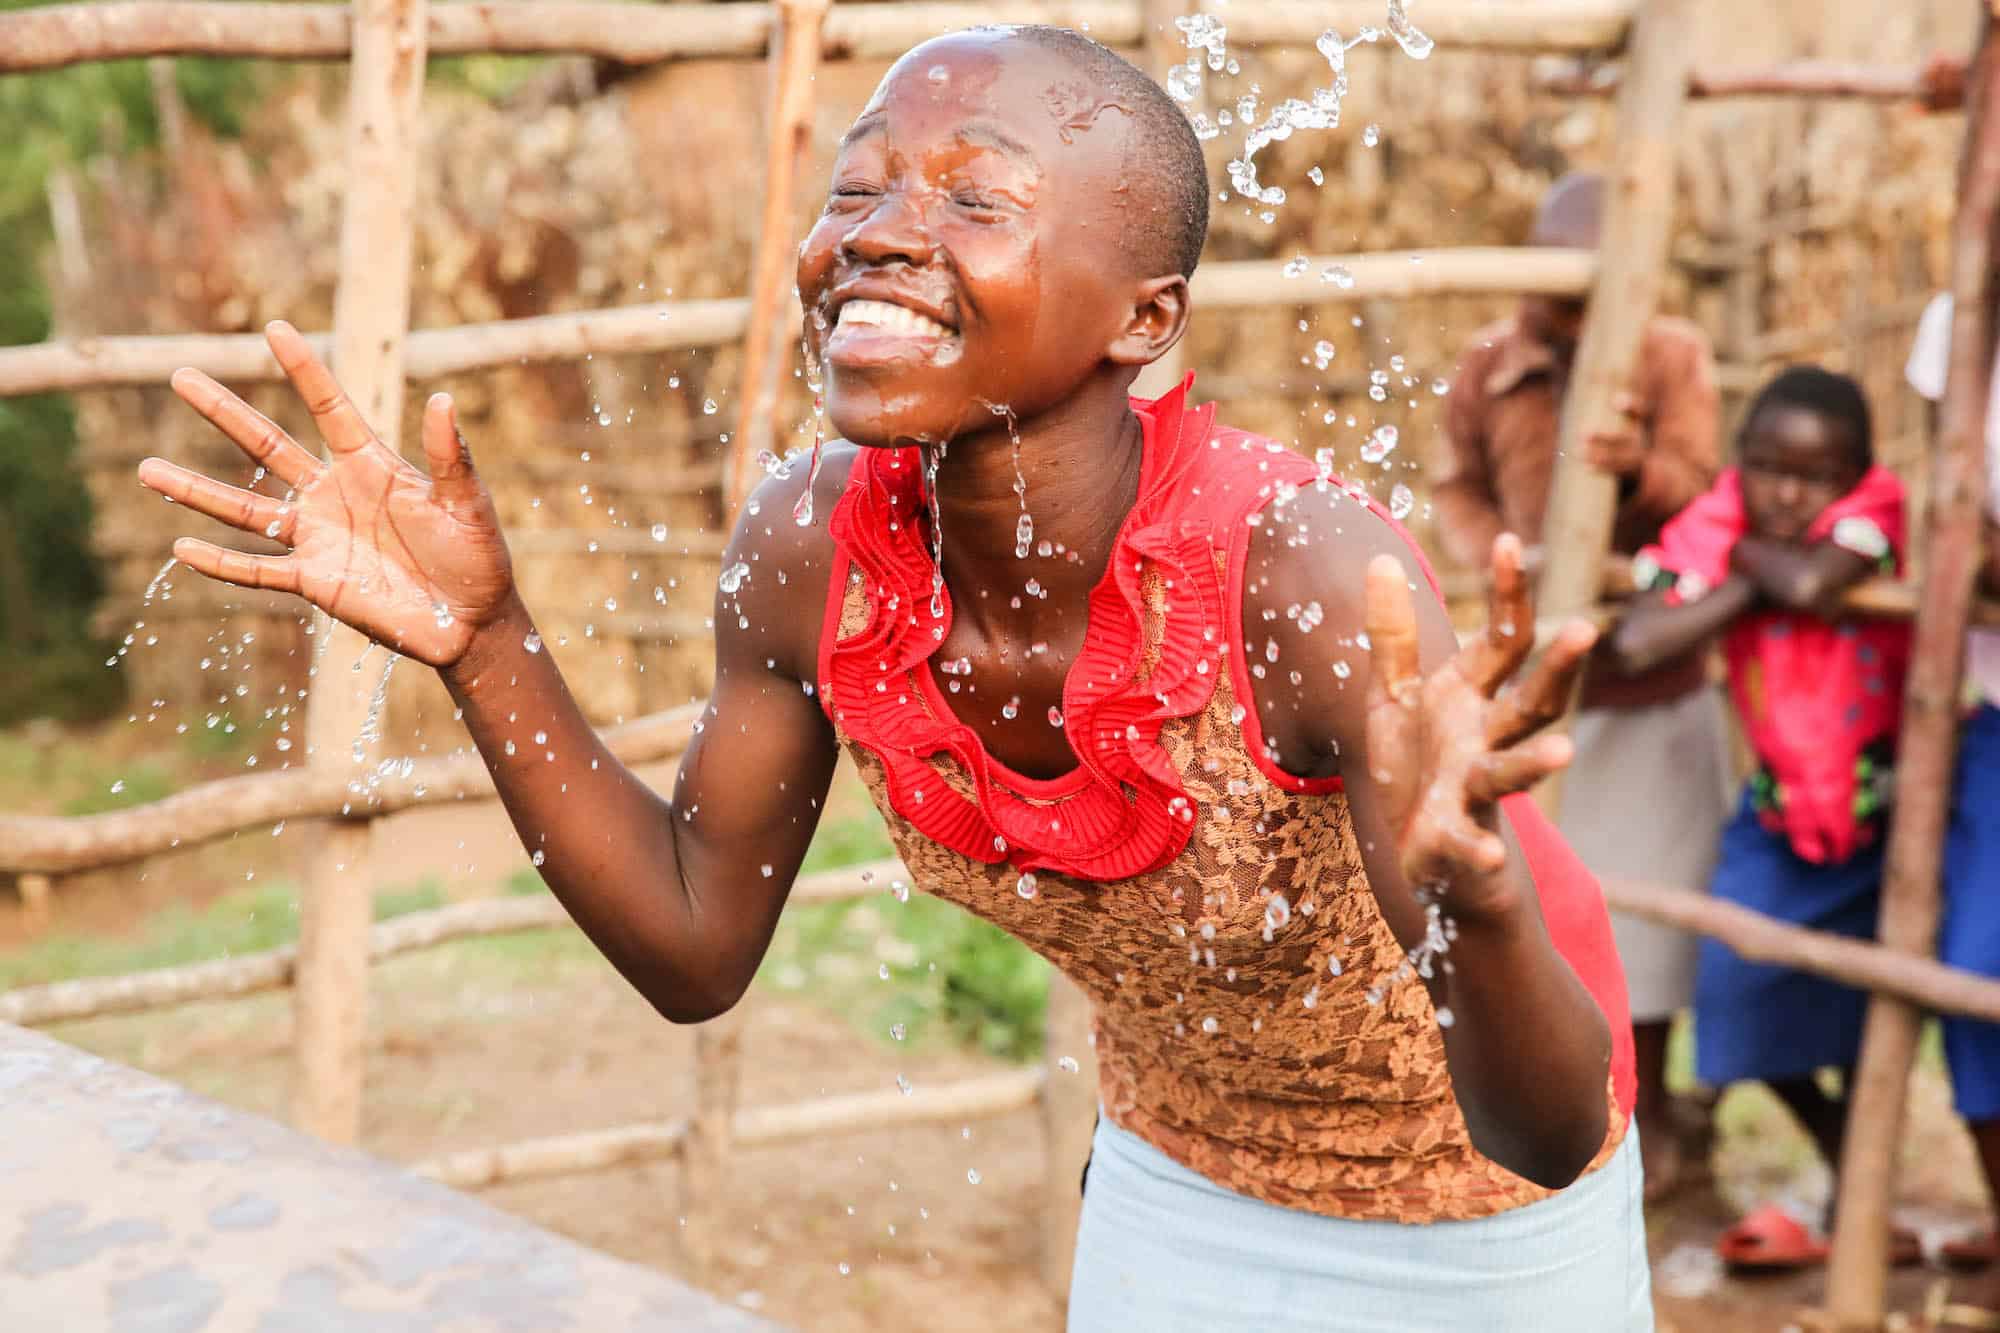 A smiling African youth splashing their face with water